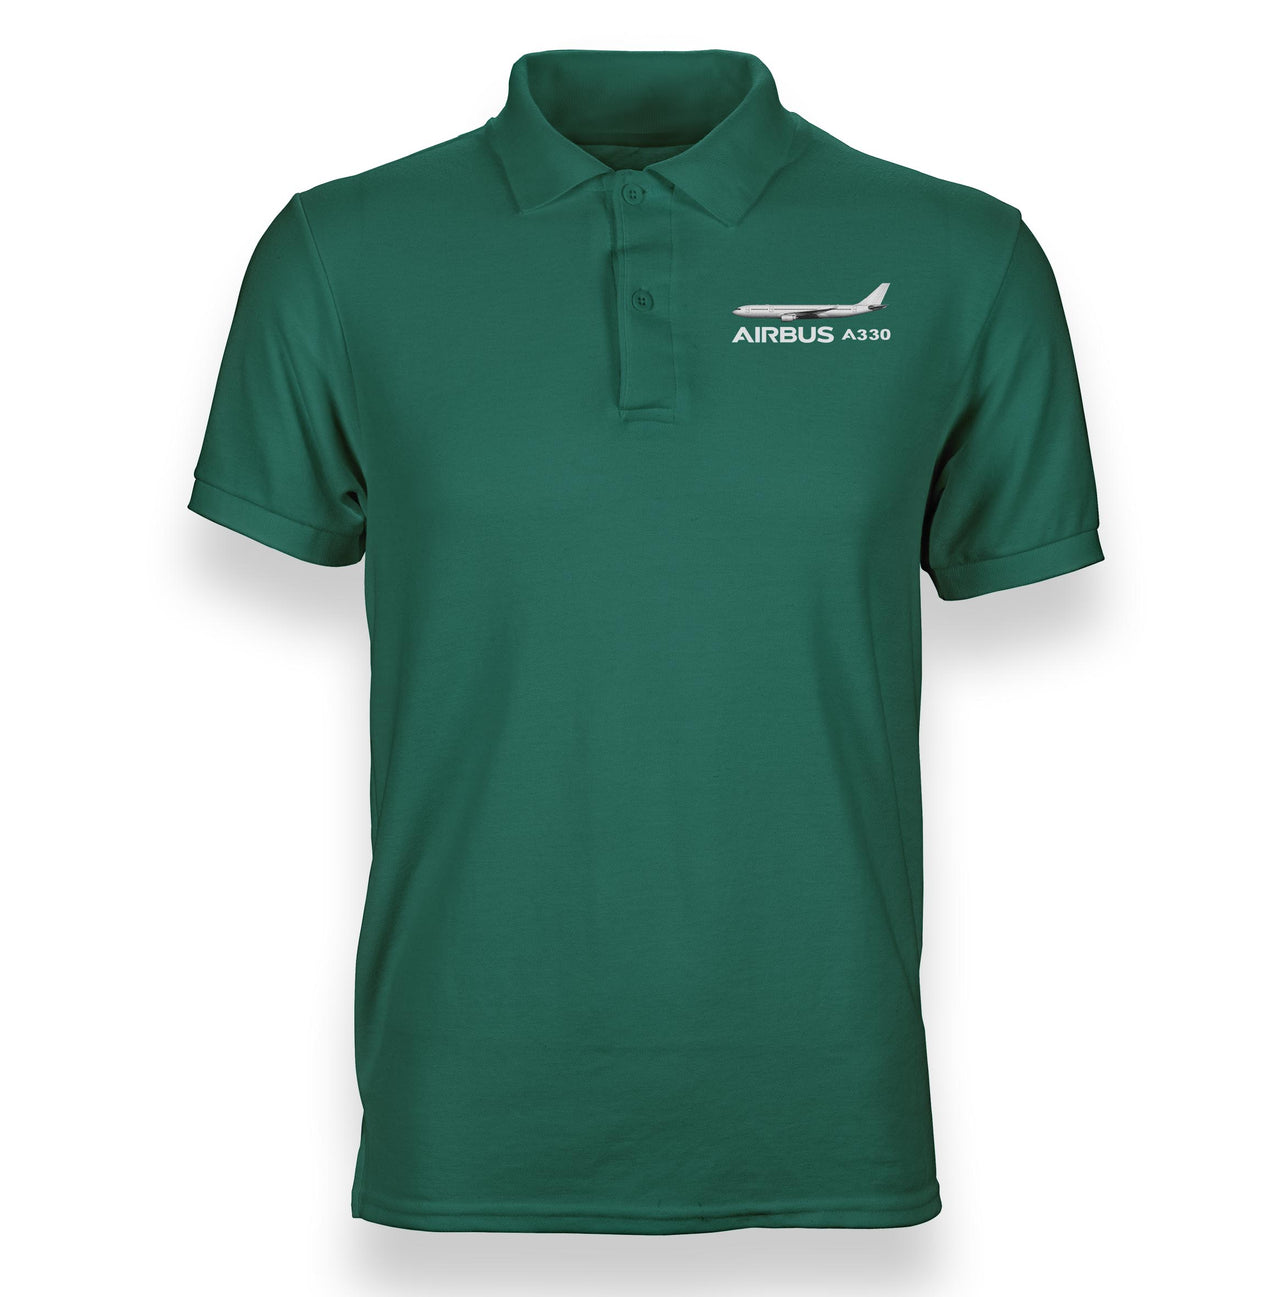 The Airbus A330 Designed Polo T-Shirts